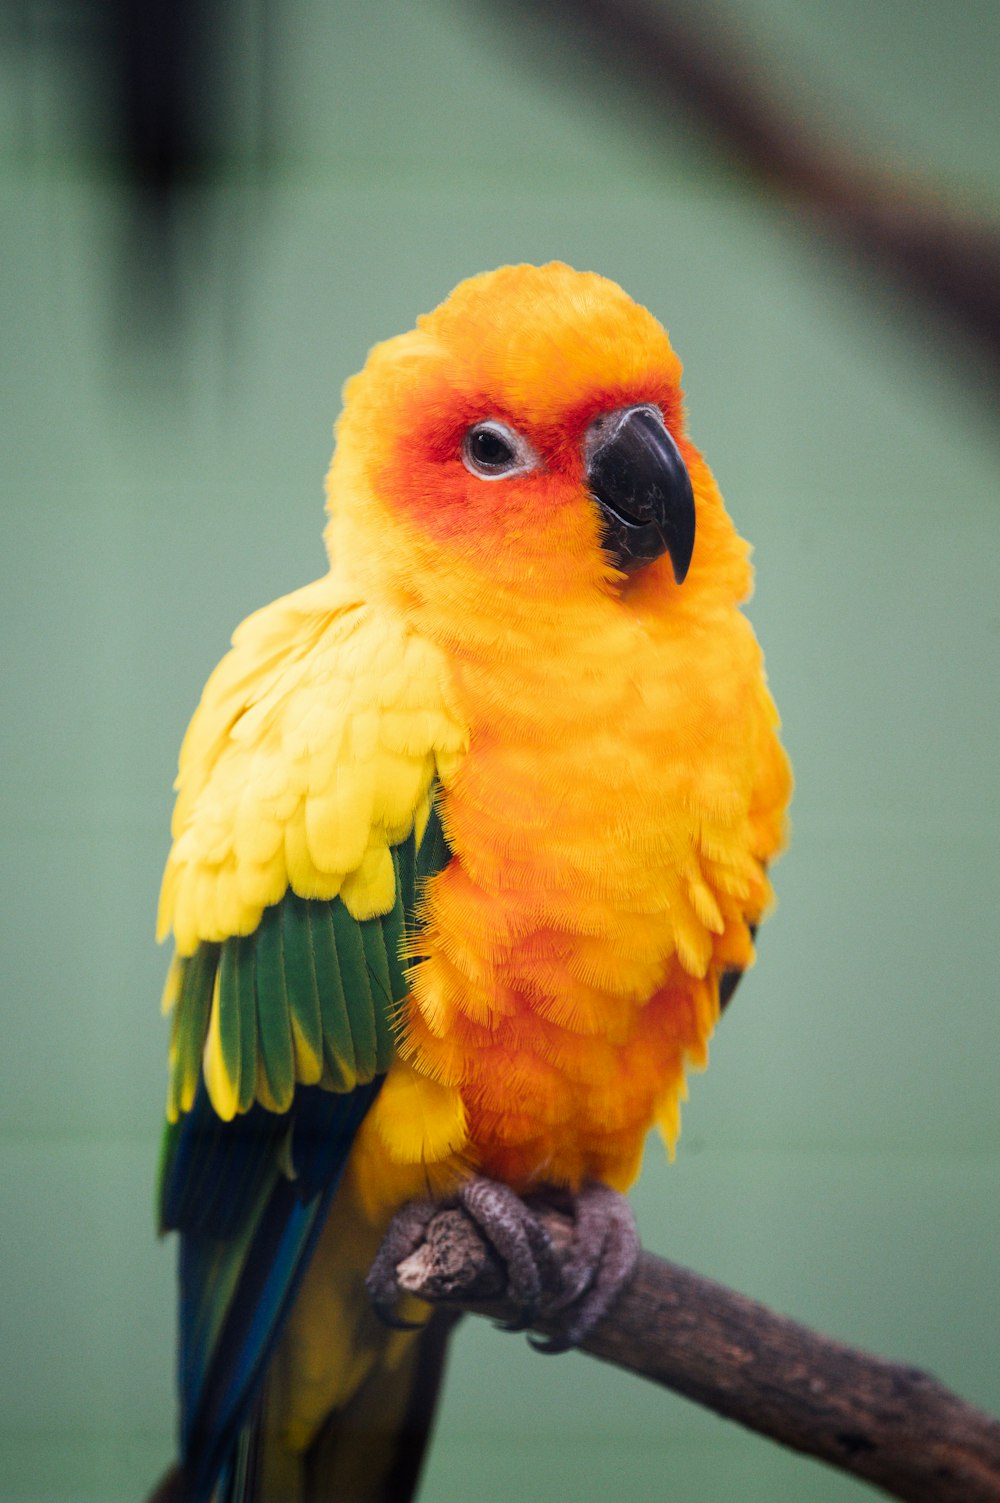 yellow and green bird on brown stick